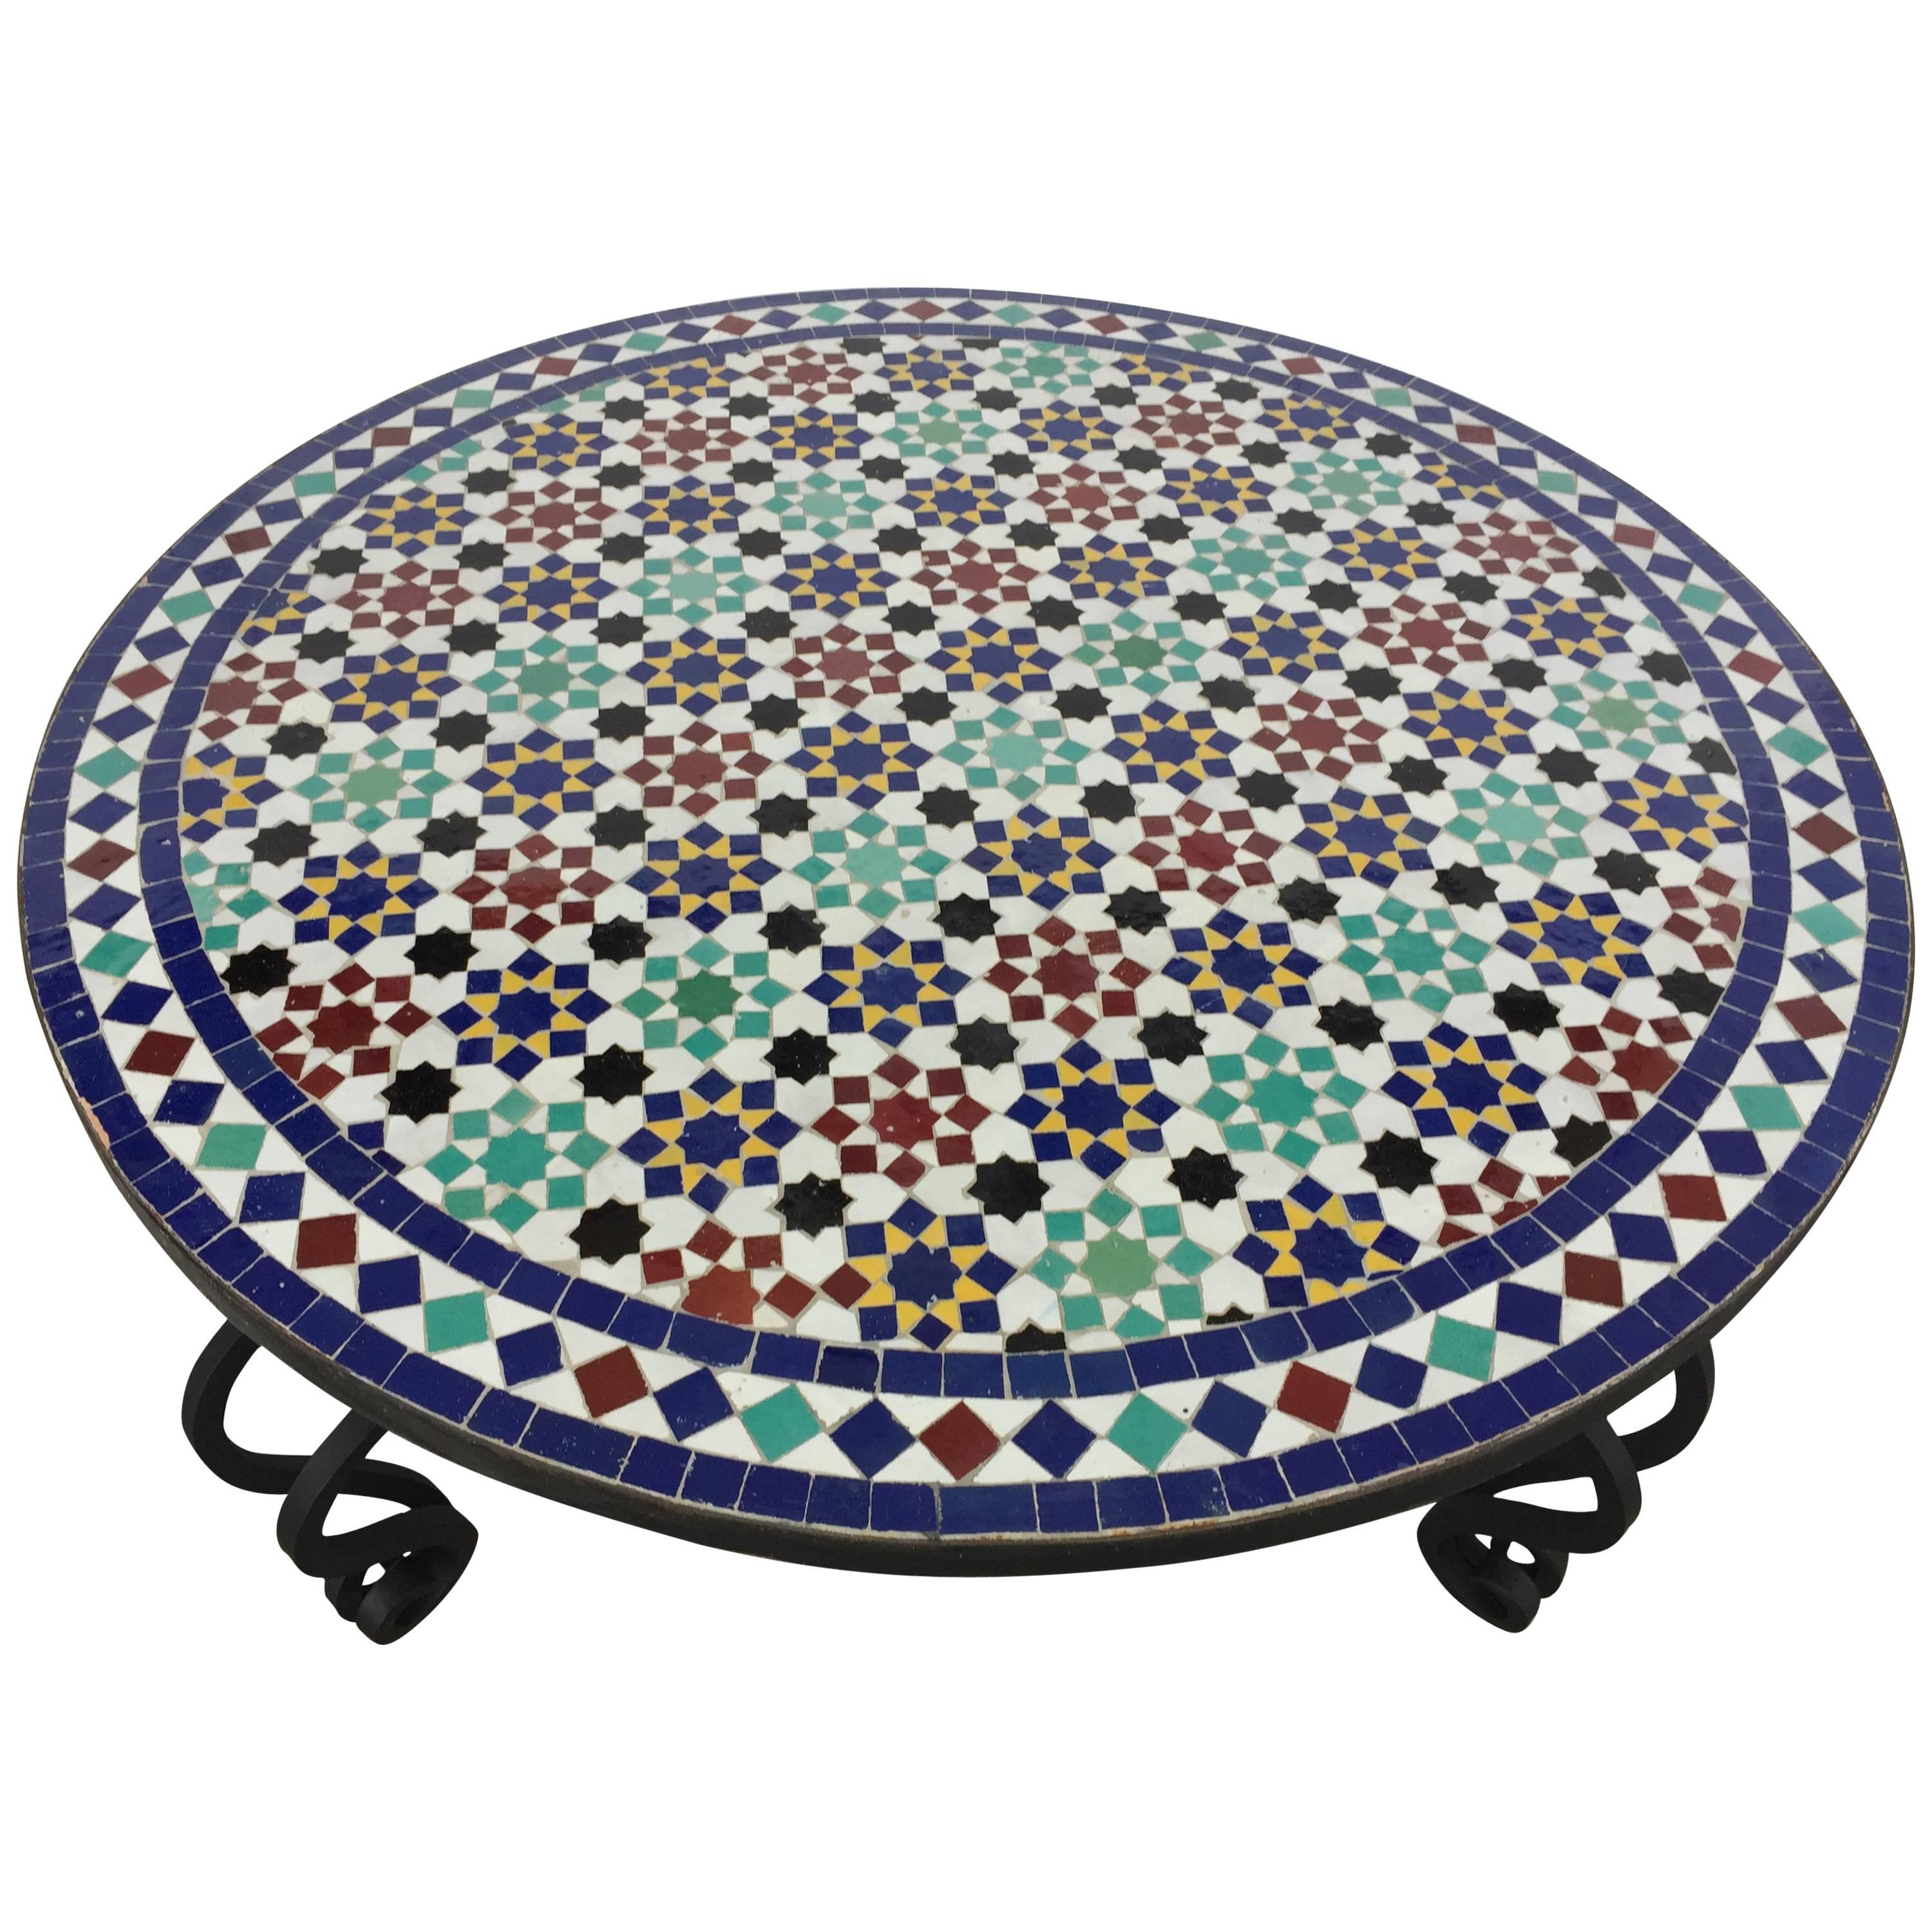 Mosaic Outdoor Round Tile Coffee Table from Morocco